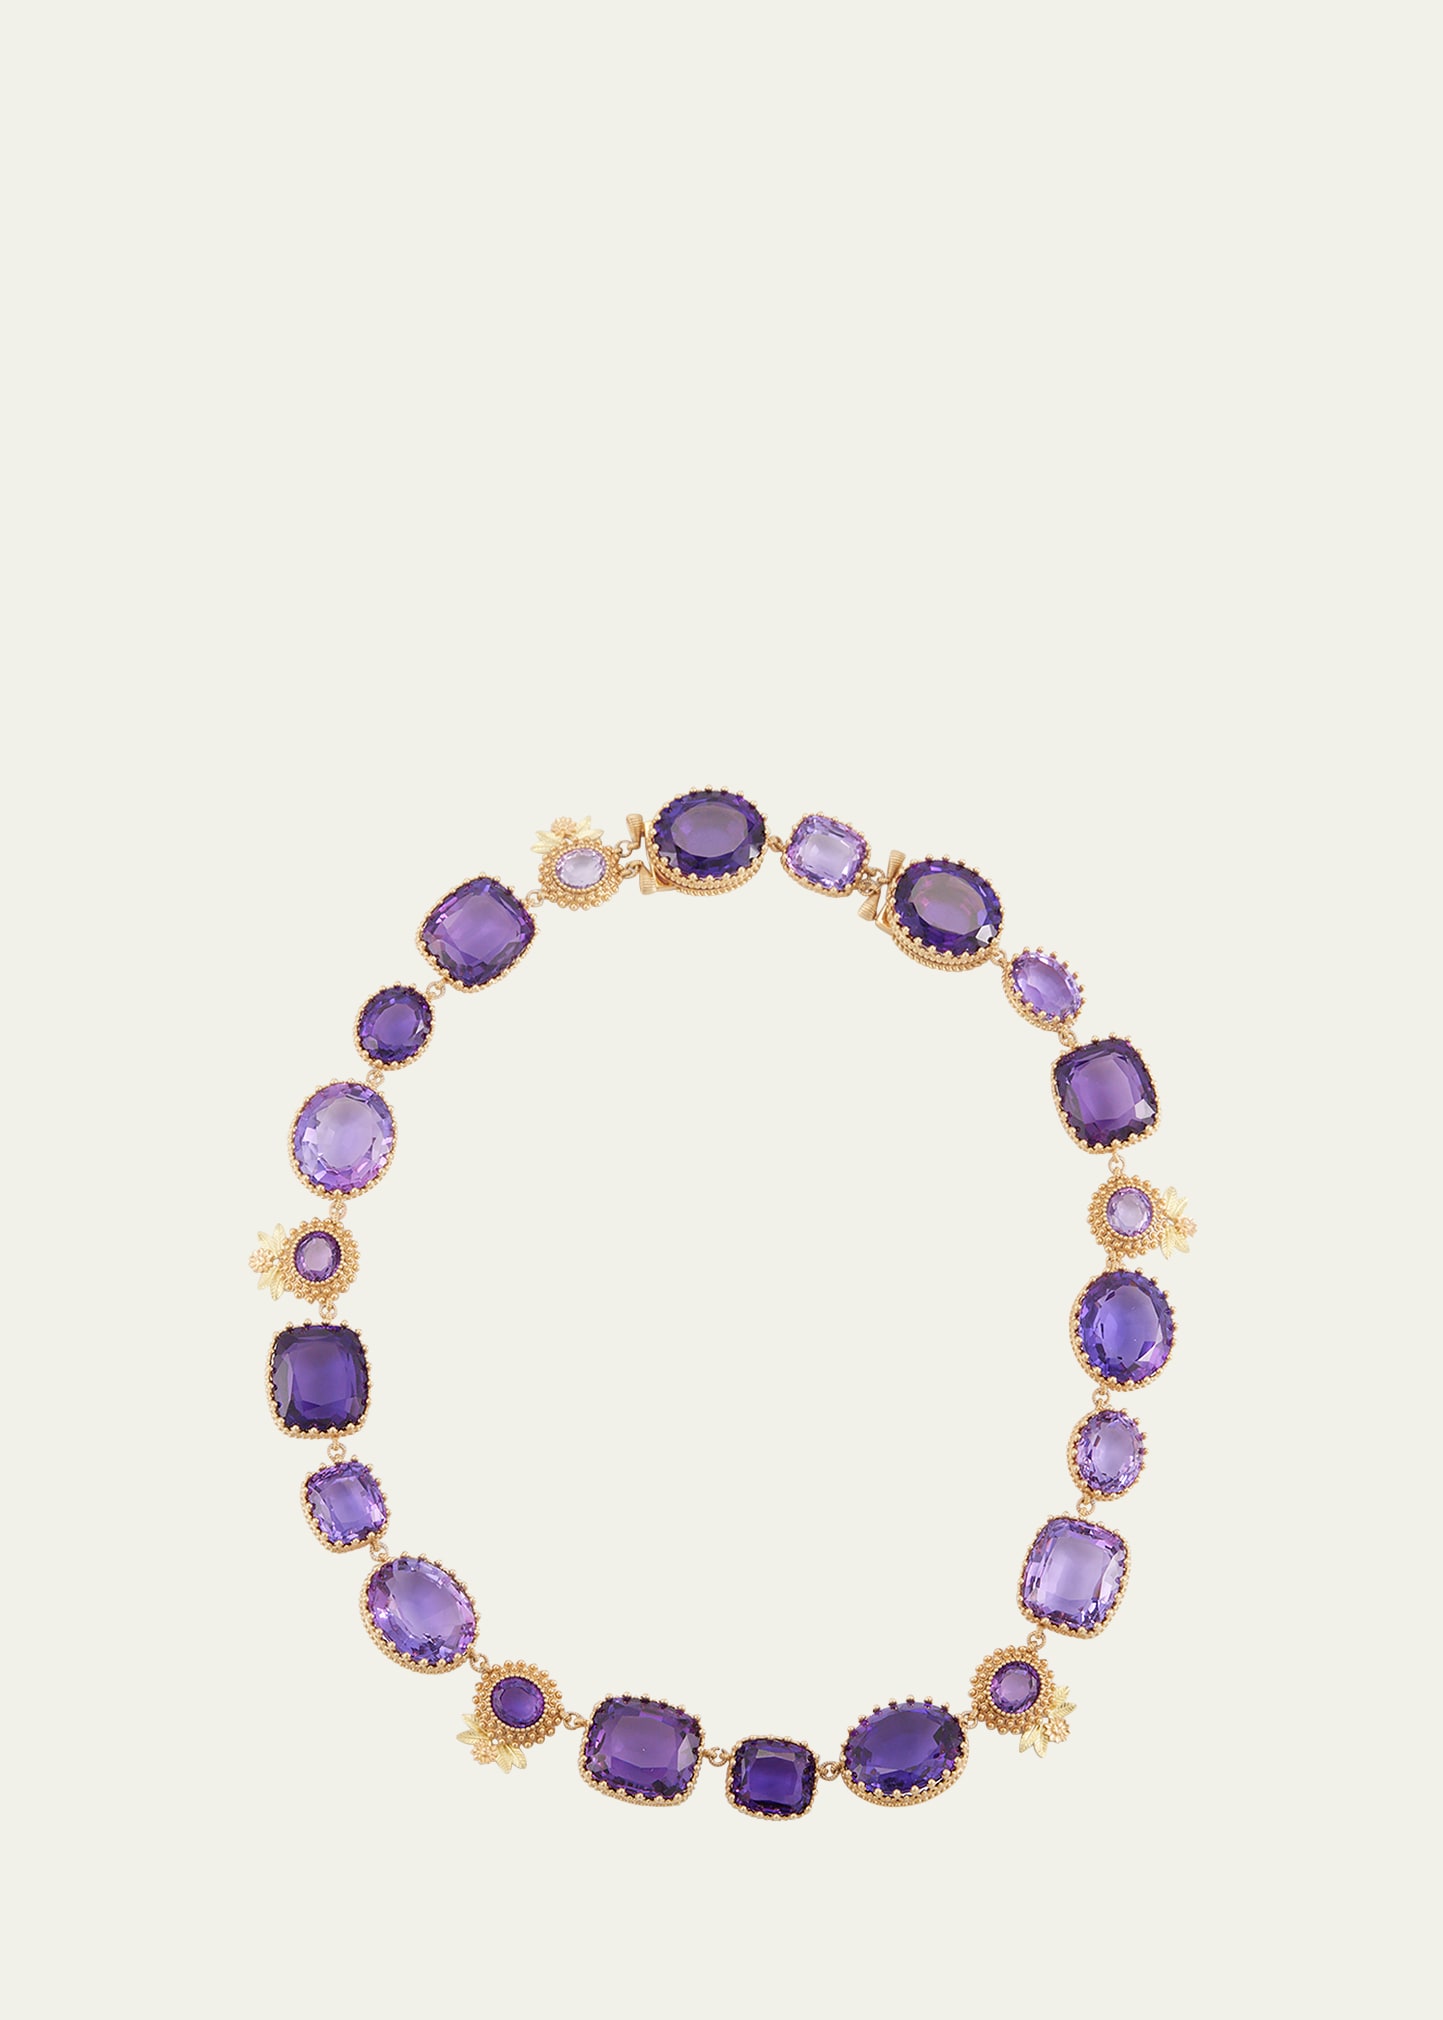 18K Yellow and Pink Gold Pierreries Necklace with Floral Pattern and Amethyst